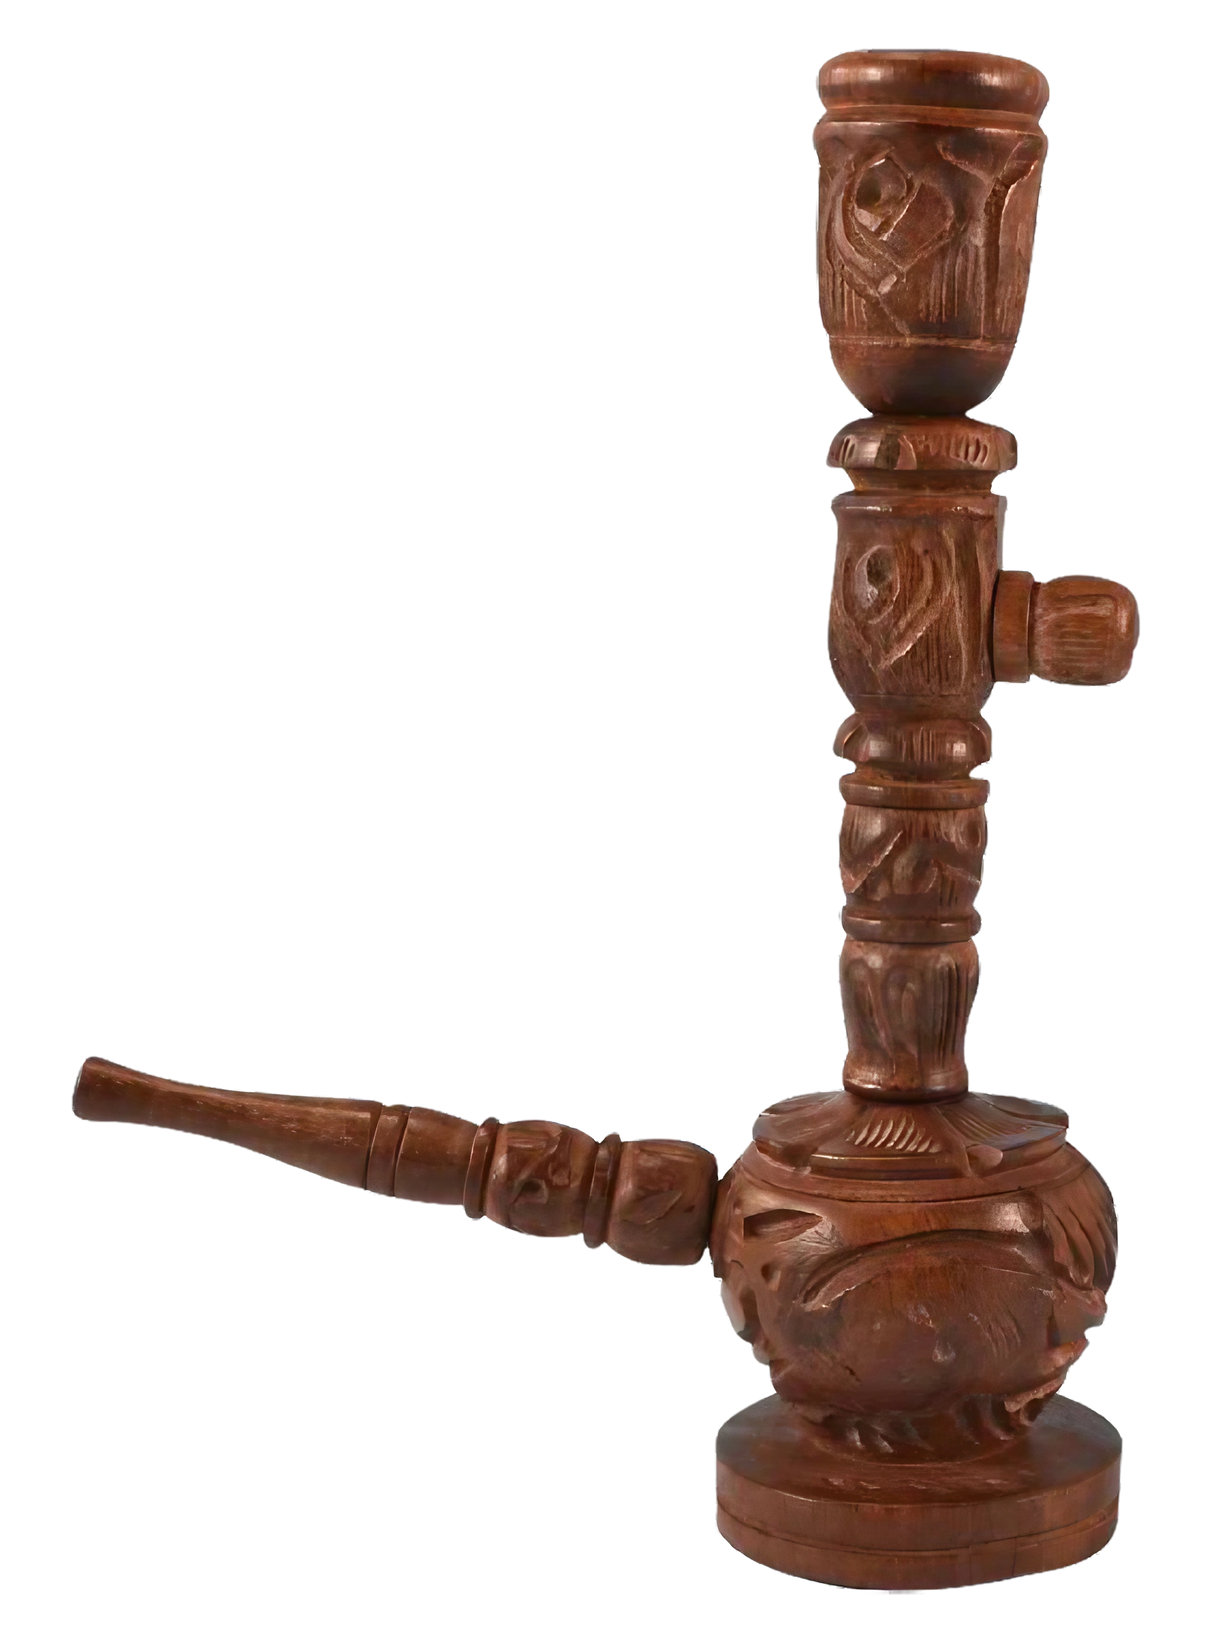 Intricately carved adjustable wooden pipe for dry herbs, 4.25" height, side view on white background